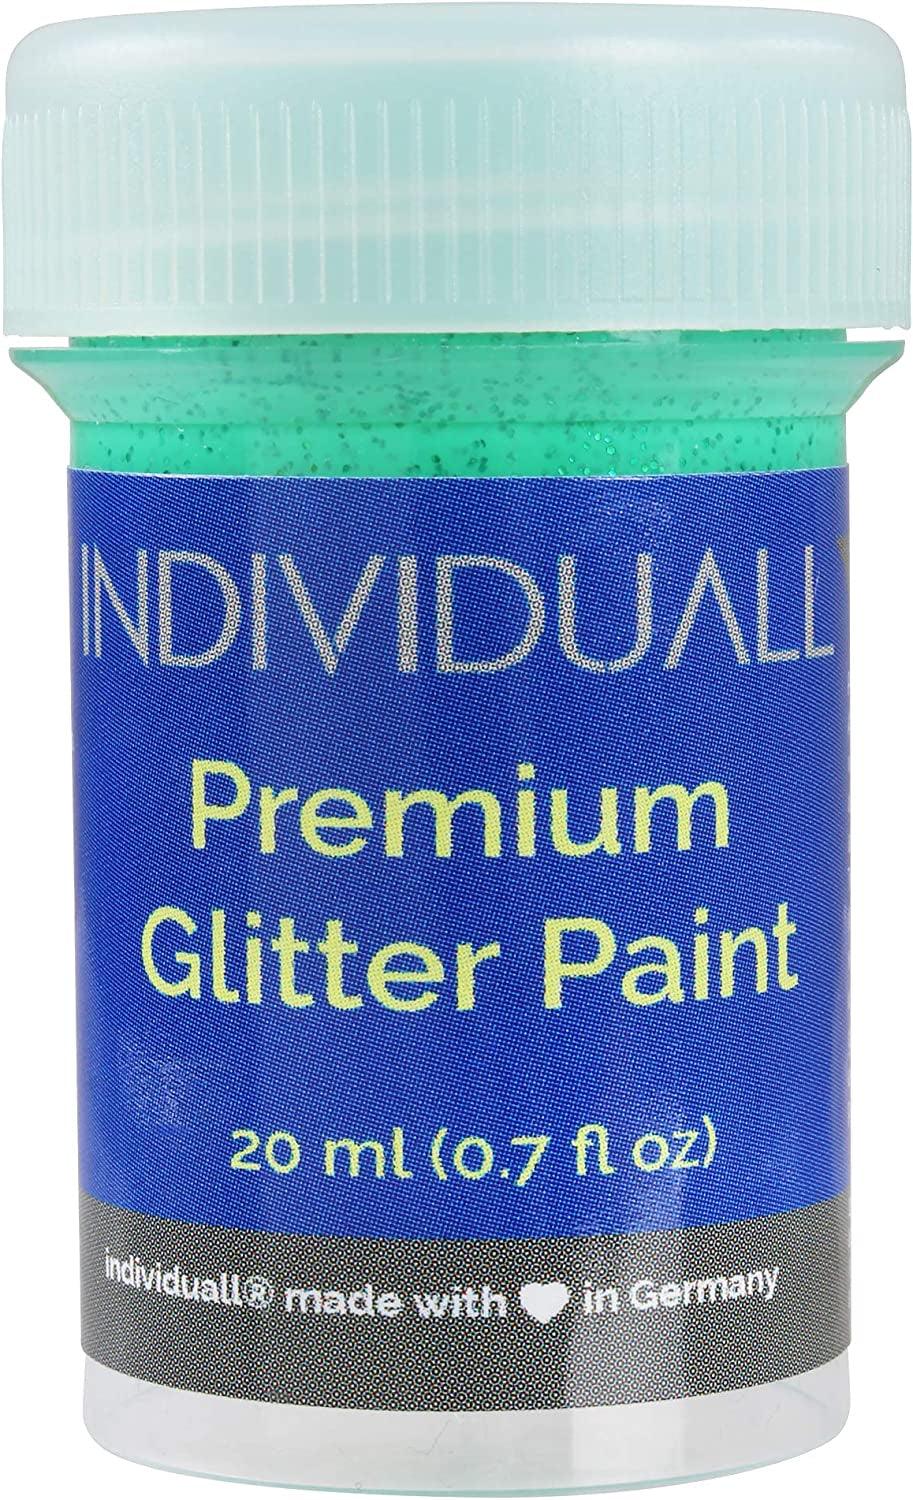 Glitter Paint Set of 8 Sparkly, 20Ml Acrylic Paints with Metallic Shimmer Canvas, Paper, Wood, Metal and Plastic - WoodArtSupply